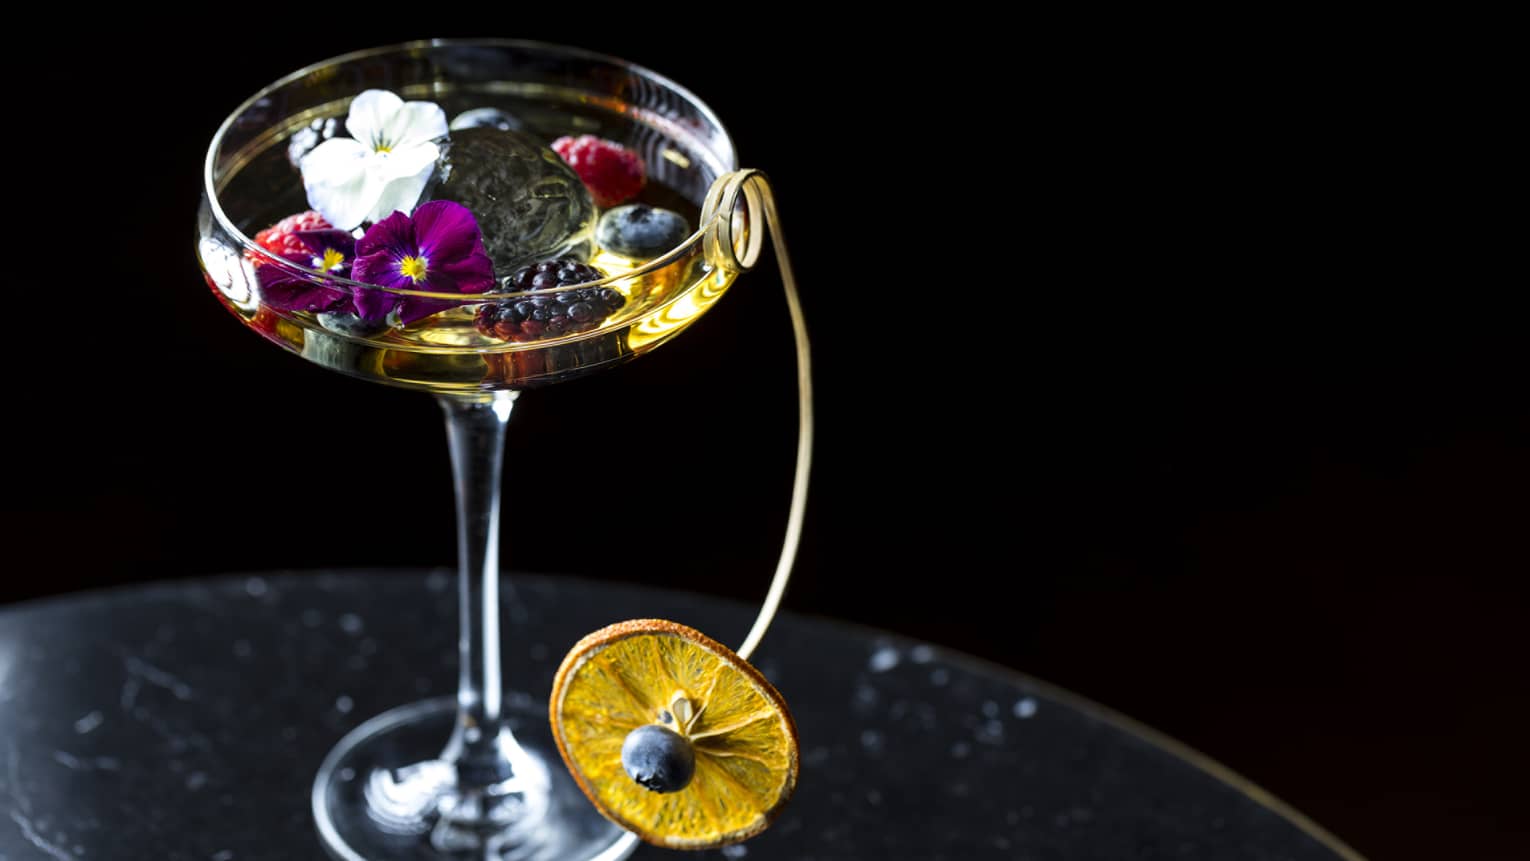 Cocktail glass. liquor garnished with small flowers, berries and dried orange wheel